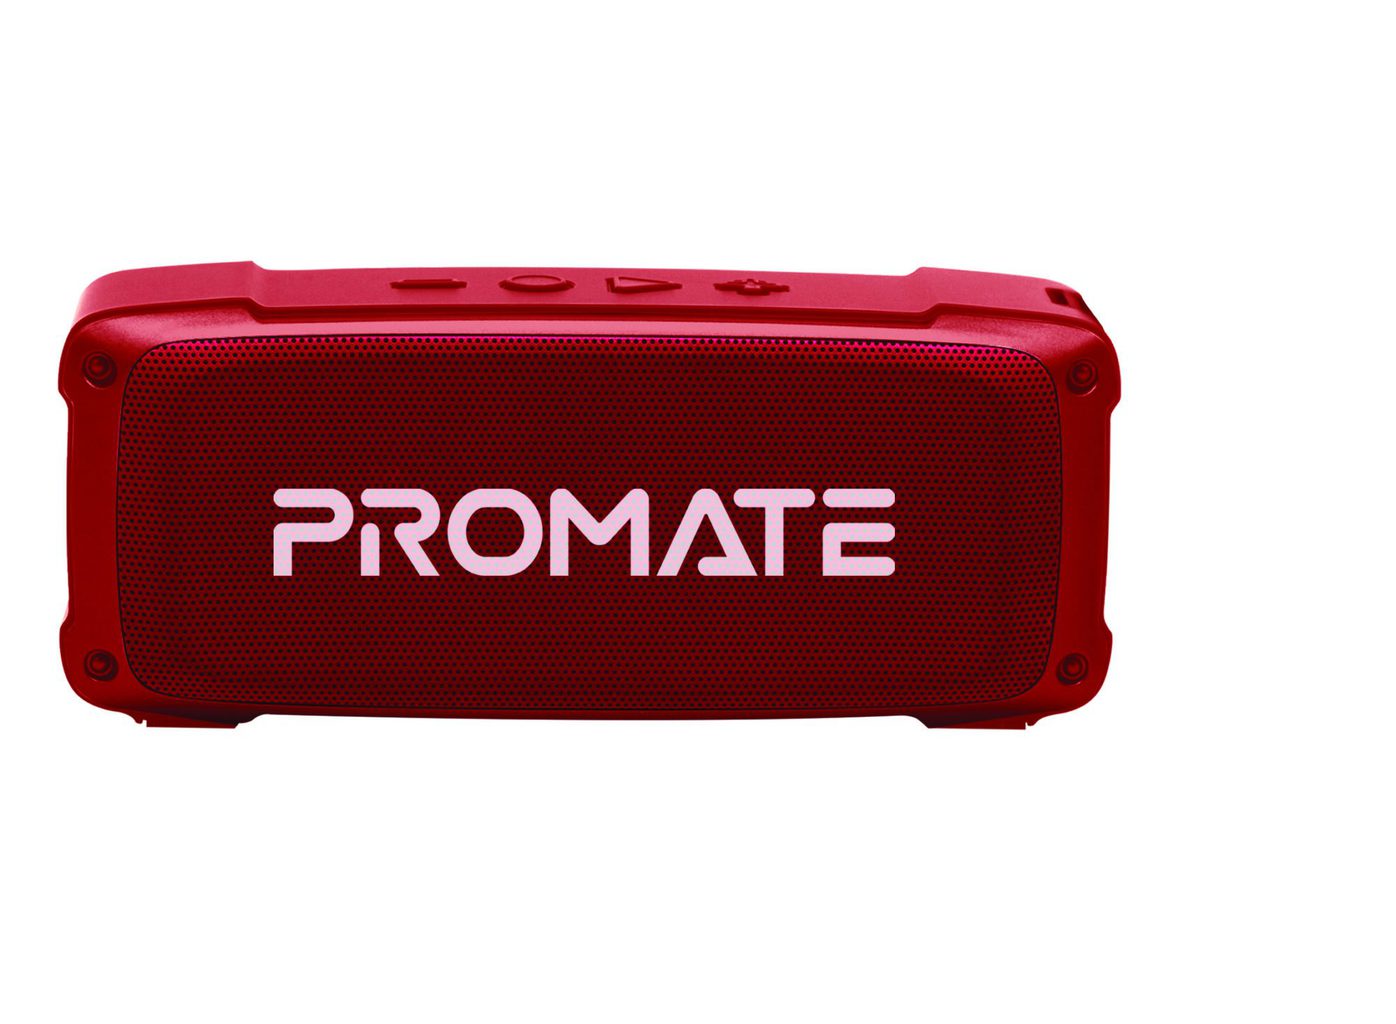 Promate Bluetooth Speaker, Premium 6W HD Rugged Wireless Speaker with 4H Playtime, Built-in Mic, FM Radio, 3.5mm Aux Port, TF Card Slot and USB Media Port for iPhone 12, iPad Pro, iPod, Android, OutBeat Maroon